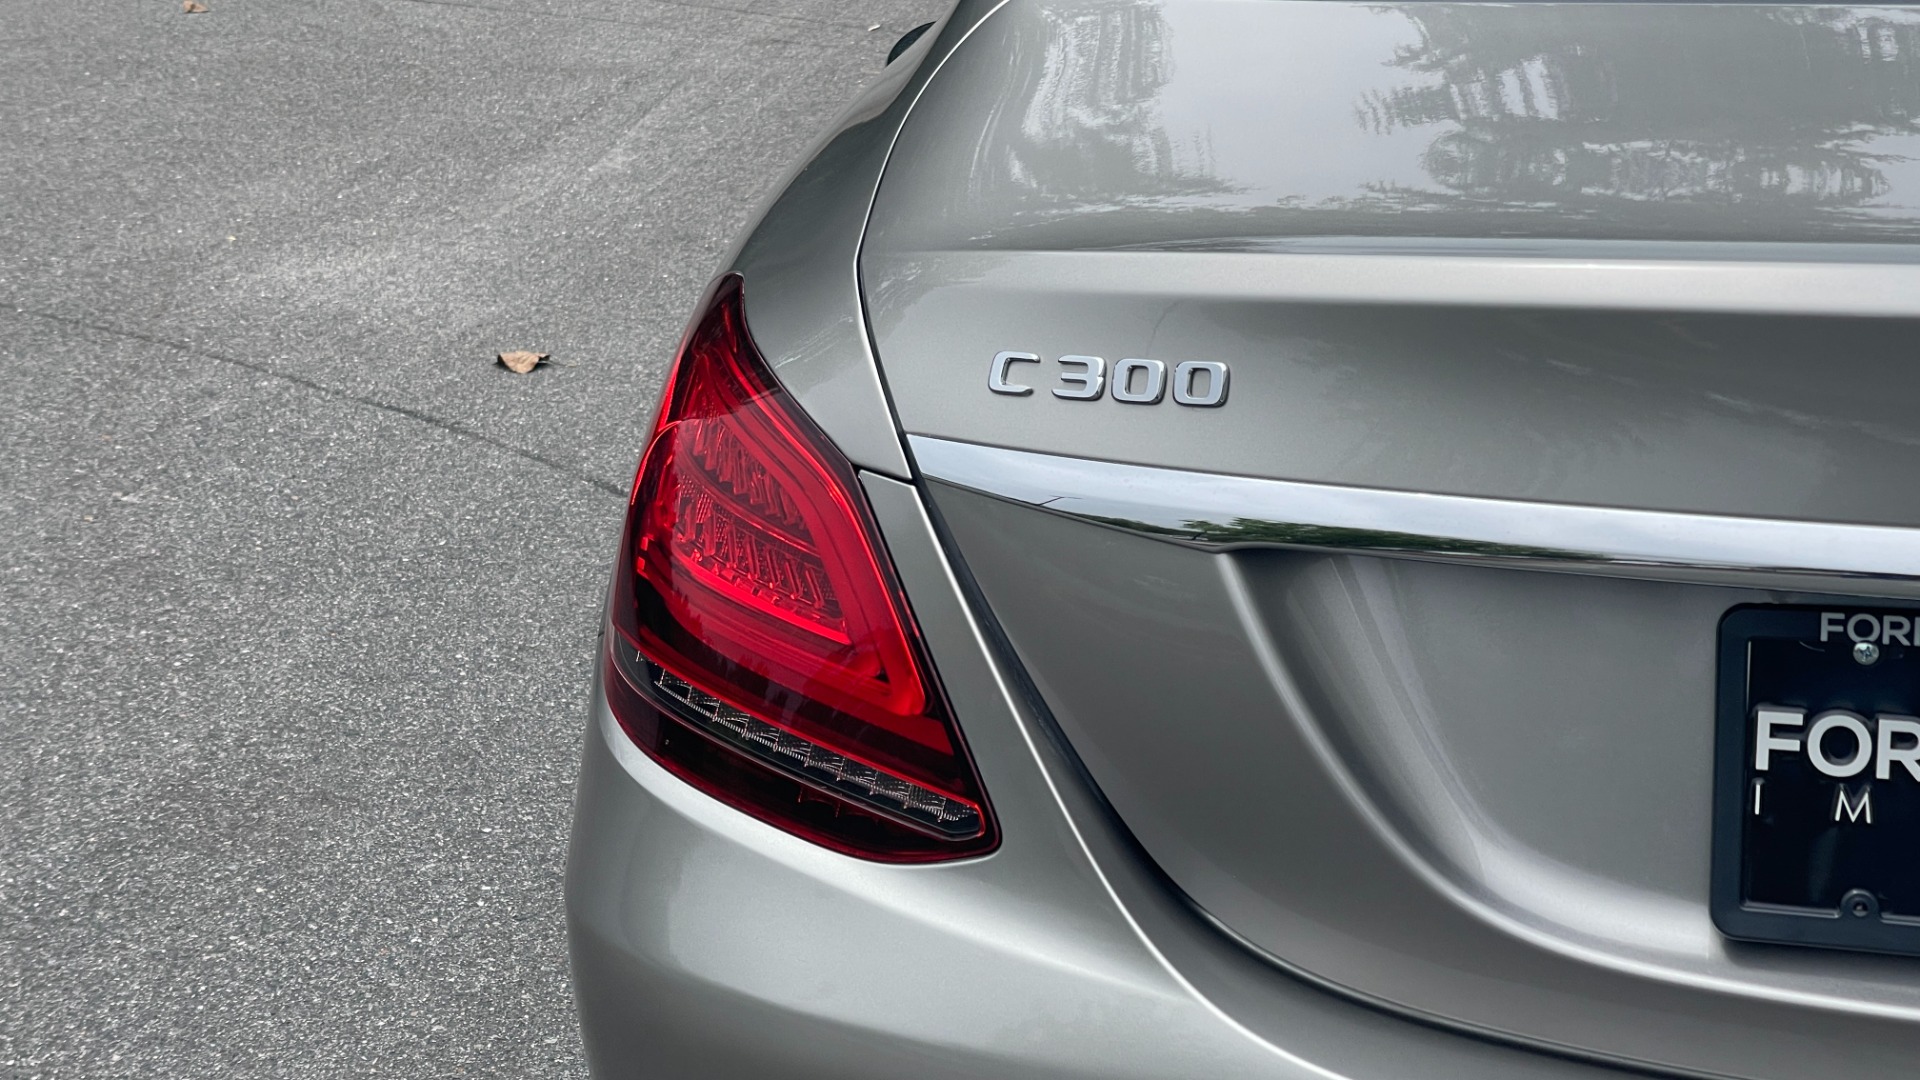 Used 2019 Mercedes-Benz C-Class C 300 / BURMESTER SOUND / PANORAMIC ROOF / WIRELESS CHARING for sale $33,995 at Formula Imports in Charlotte NC 28227 36